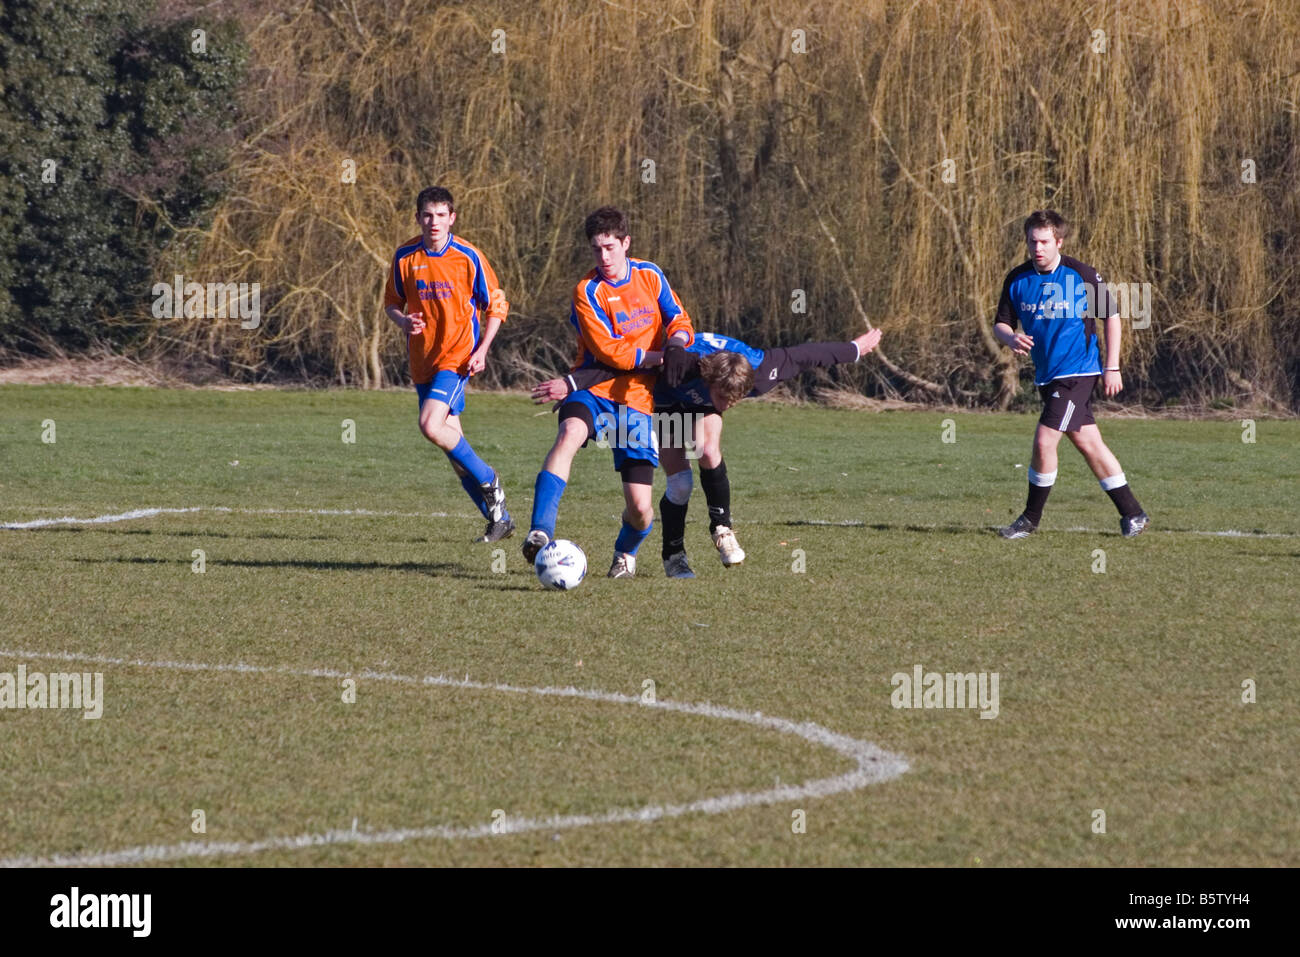 Amateur 'sunday league' association Football Match Two Players Tussling for the Ball Stock Photo